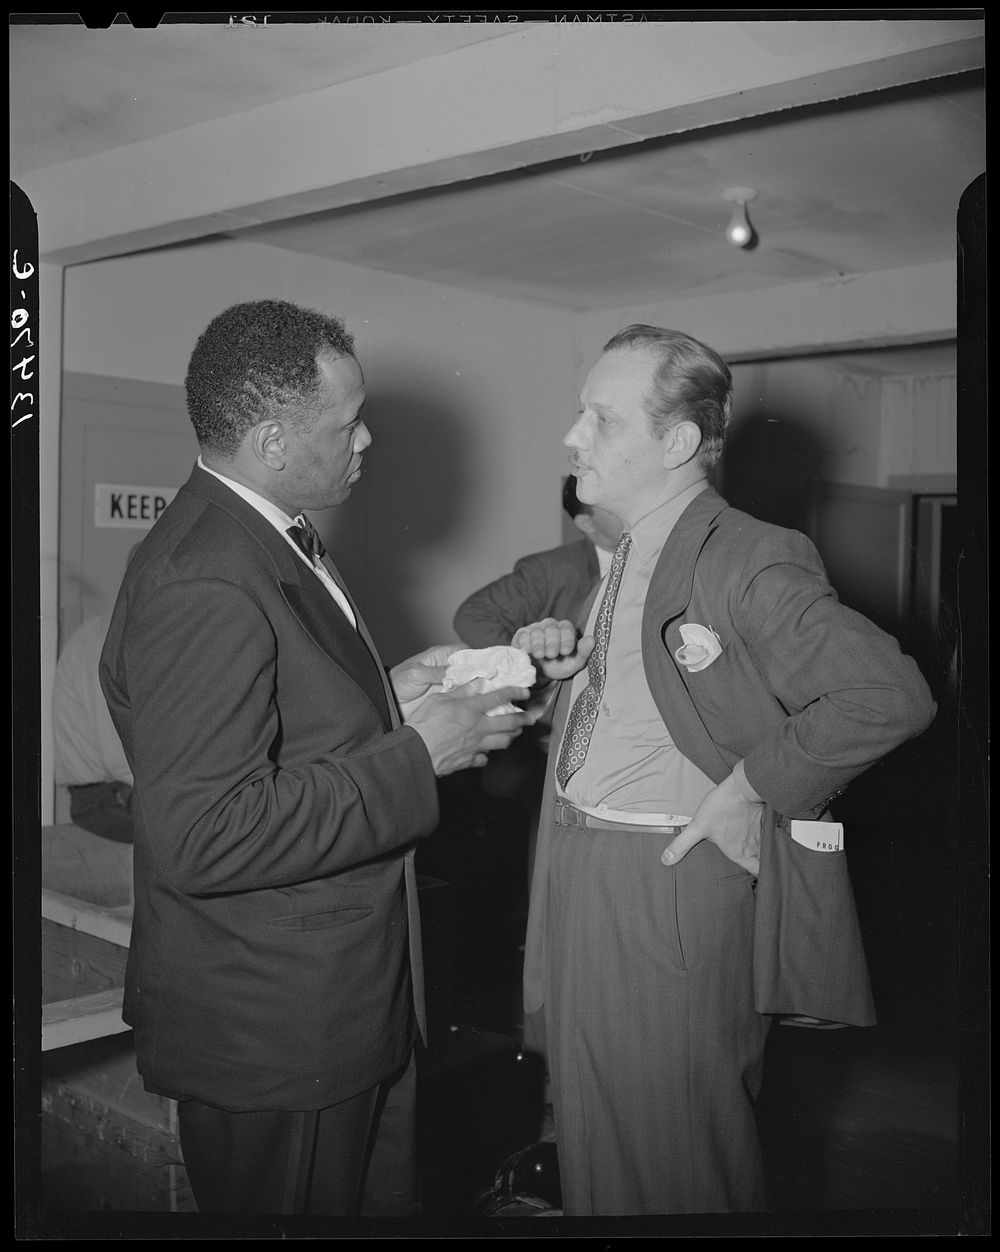 Washington, D.C. Russian war anniversary benefit at the Watergate. Melvyn Douglas and Paul Robeson backstage. Sourced from…